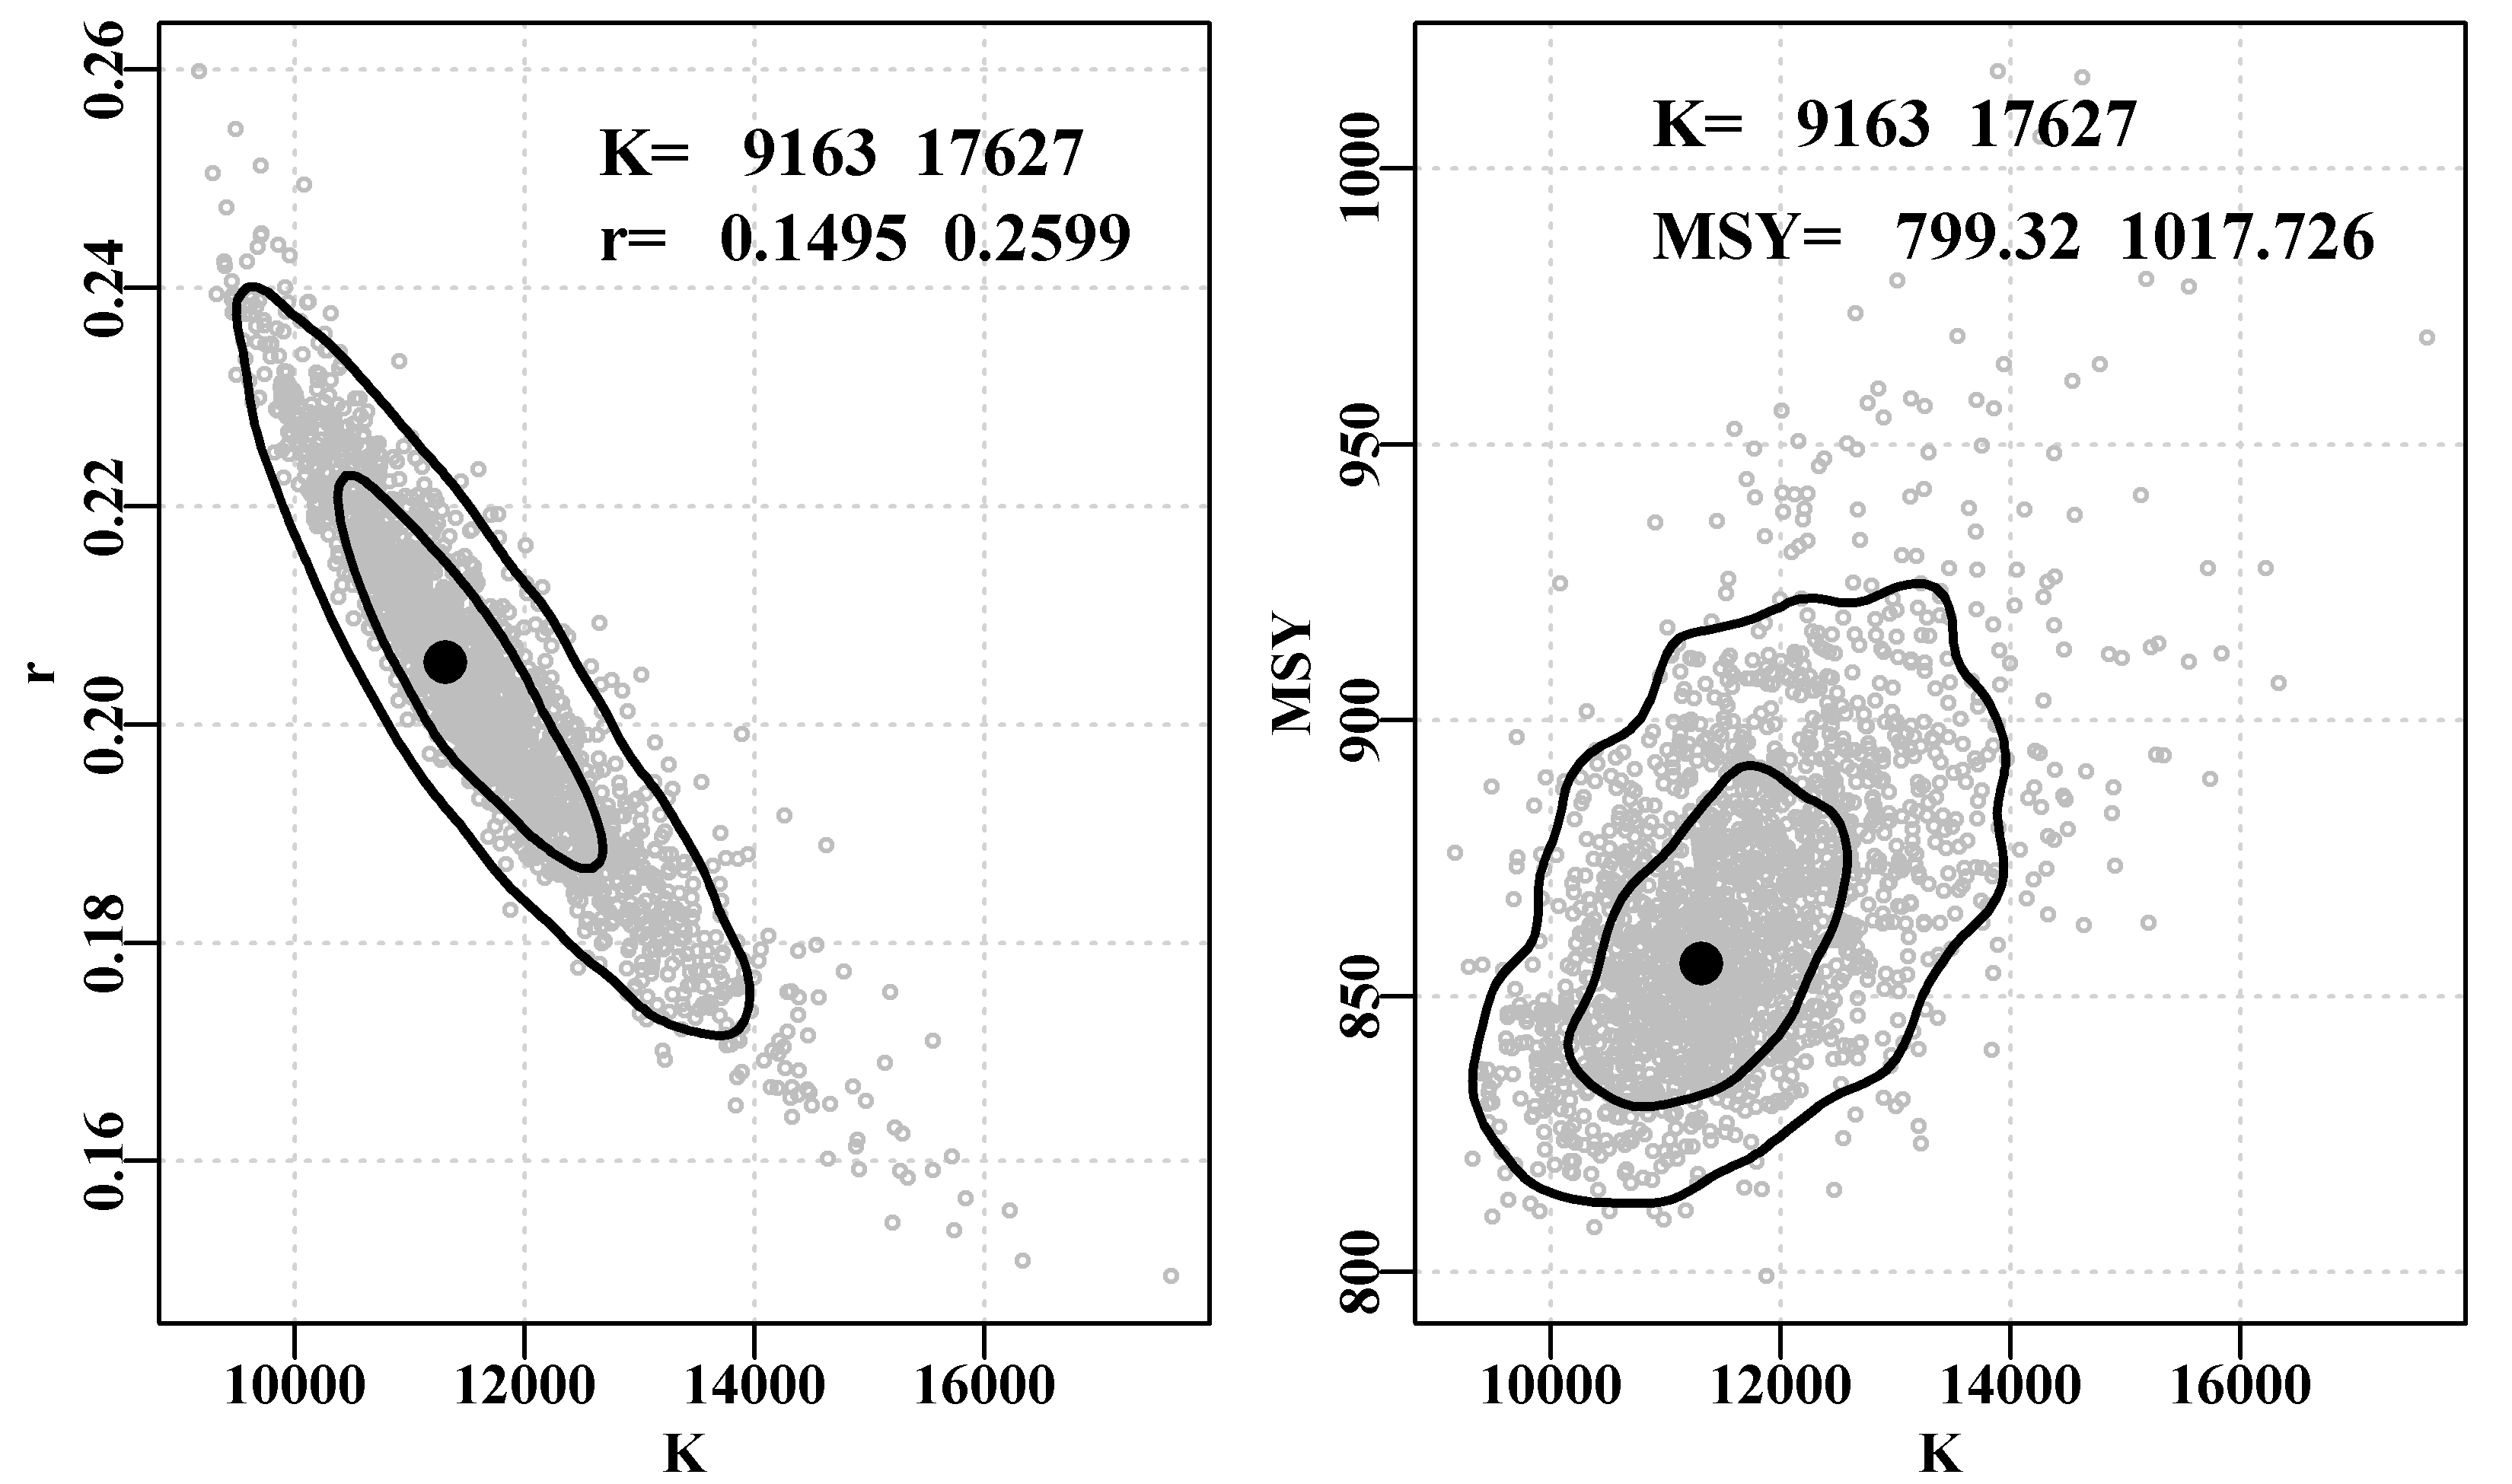 MCMC marginal distributions output as a scattergram of the r and K parameters, and the K and MSY values. The grey dots are from successful candidate parameter vectors, while the contours are approximate 50th and 90th percentiles. The text give the full range of the accepted parameter traces.